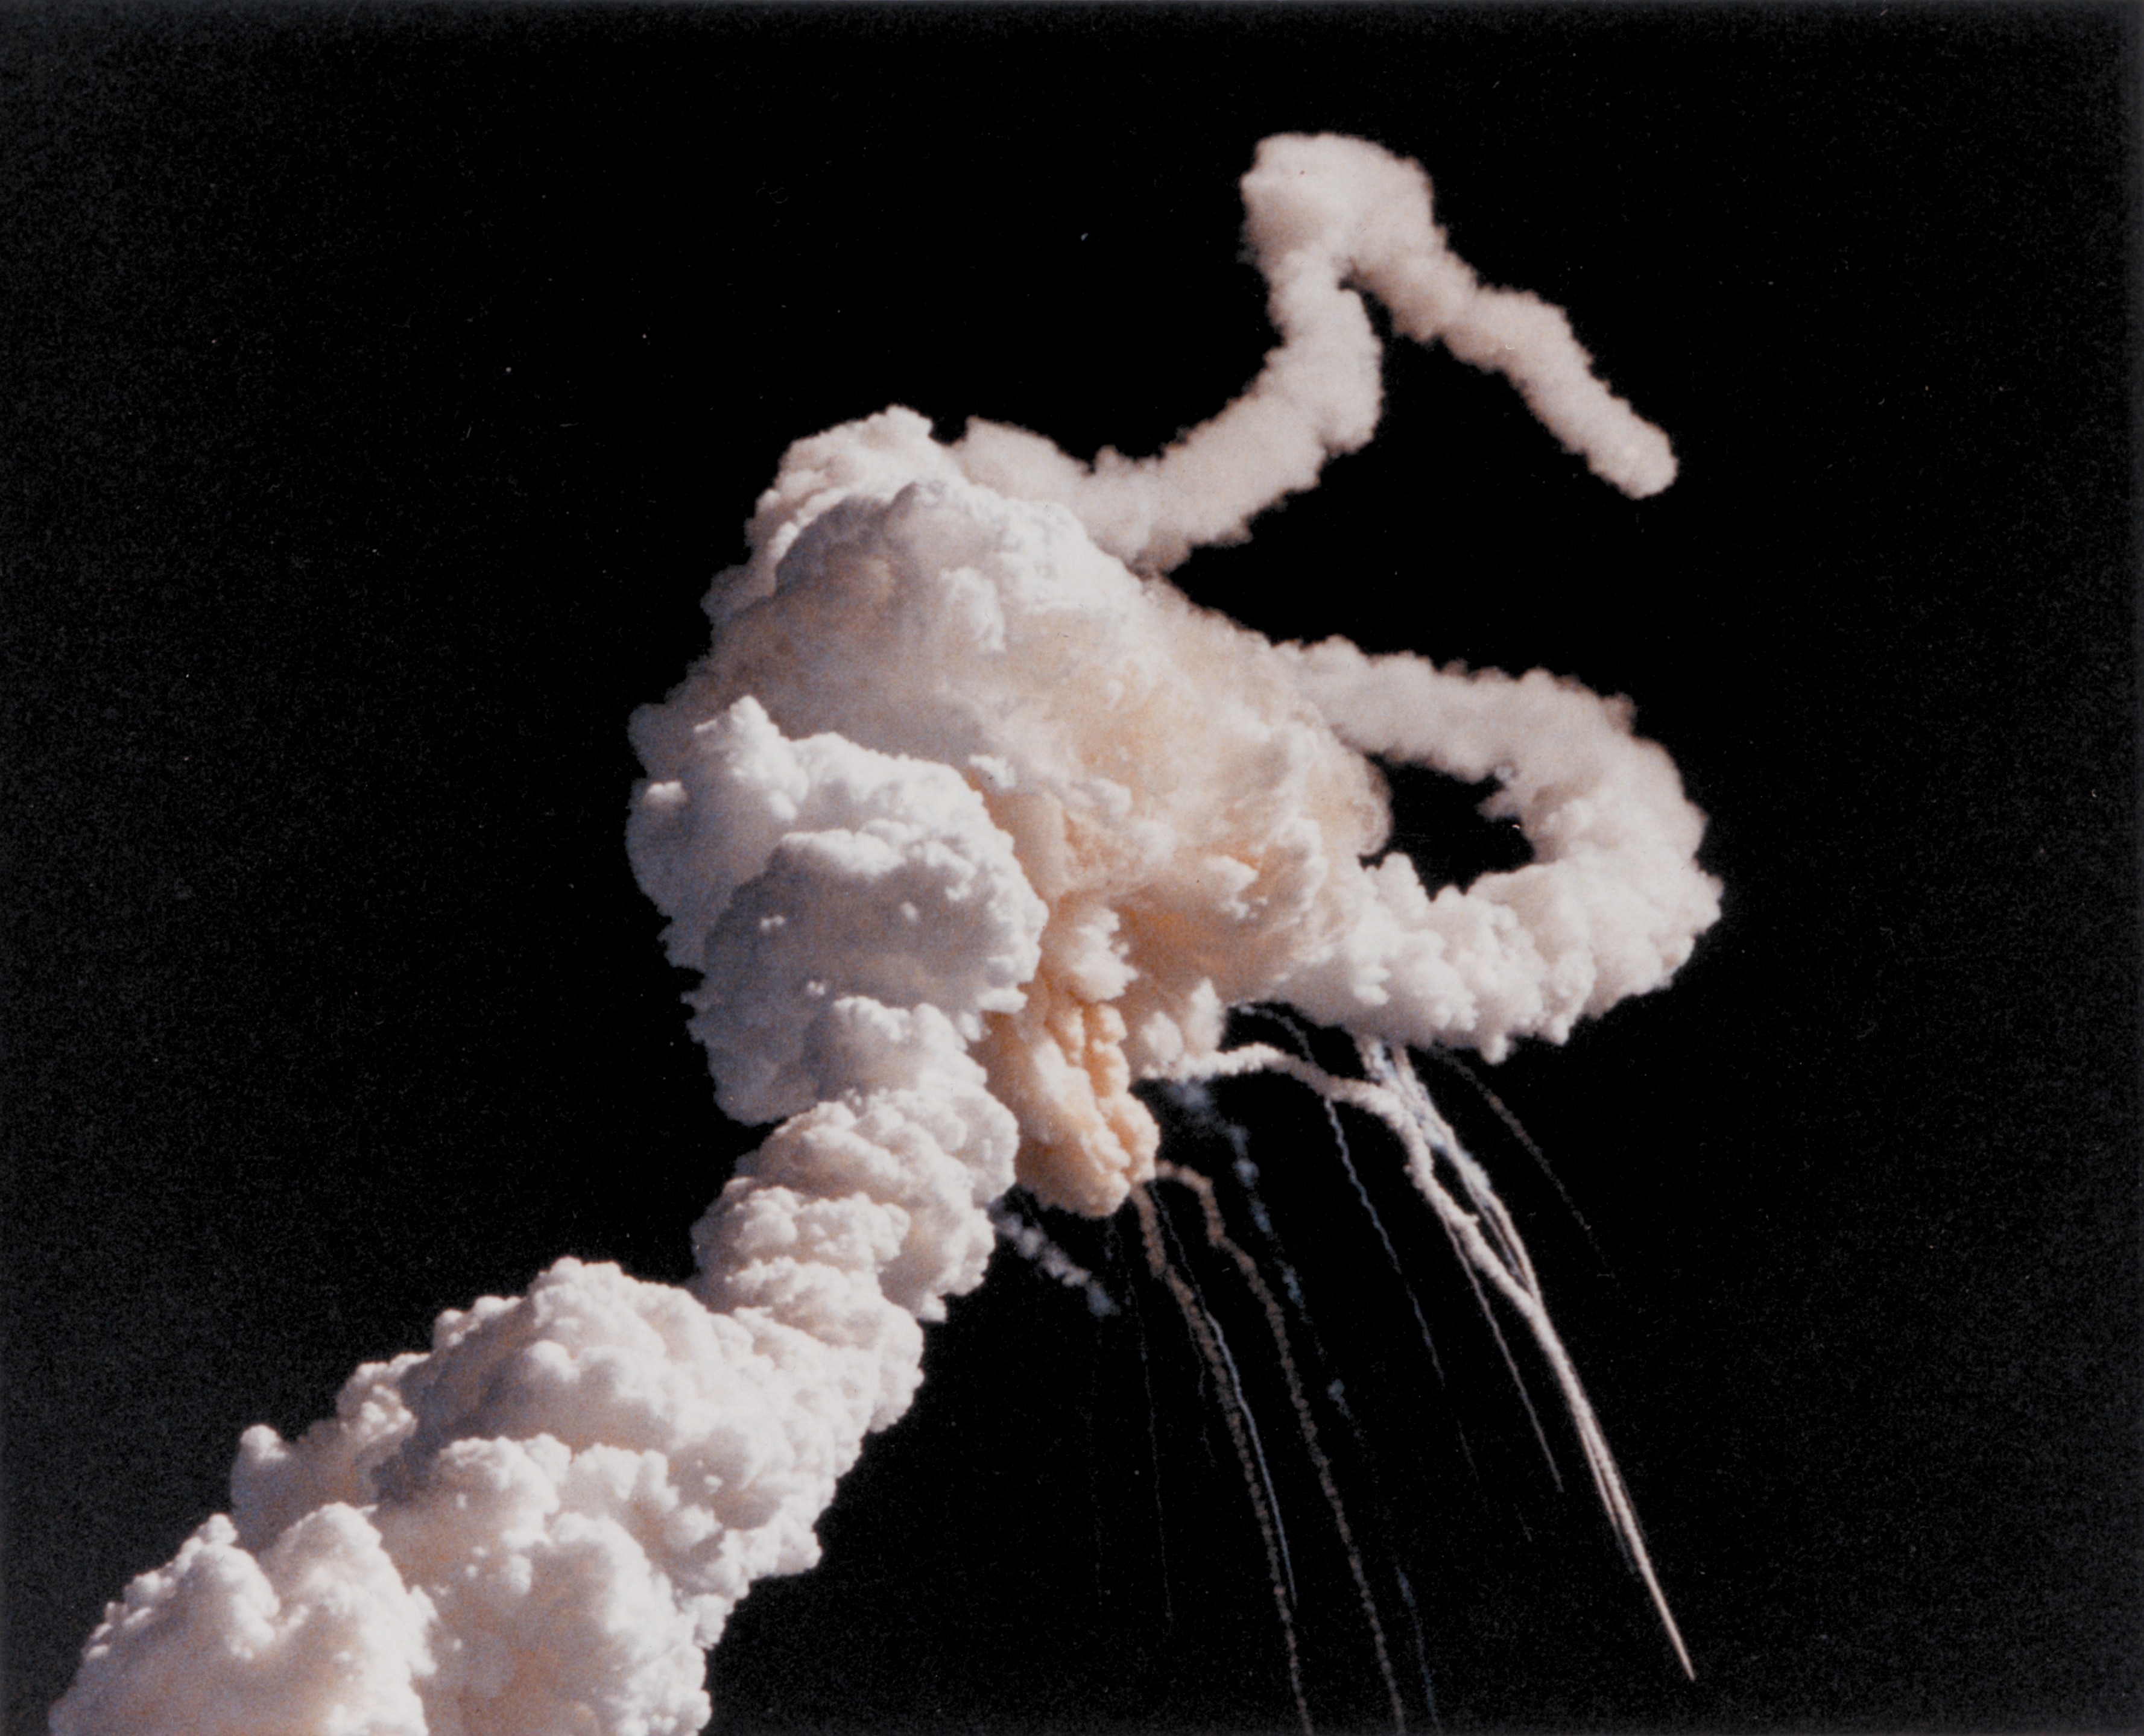 Space Shuttle Challenger explodes shortly after take-off, January 28, 1986 [NASA].